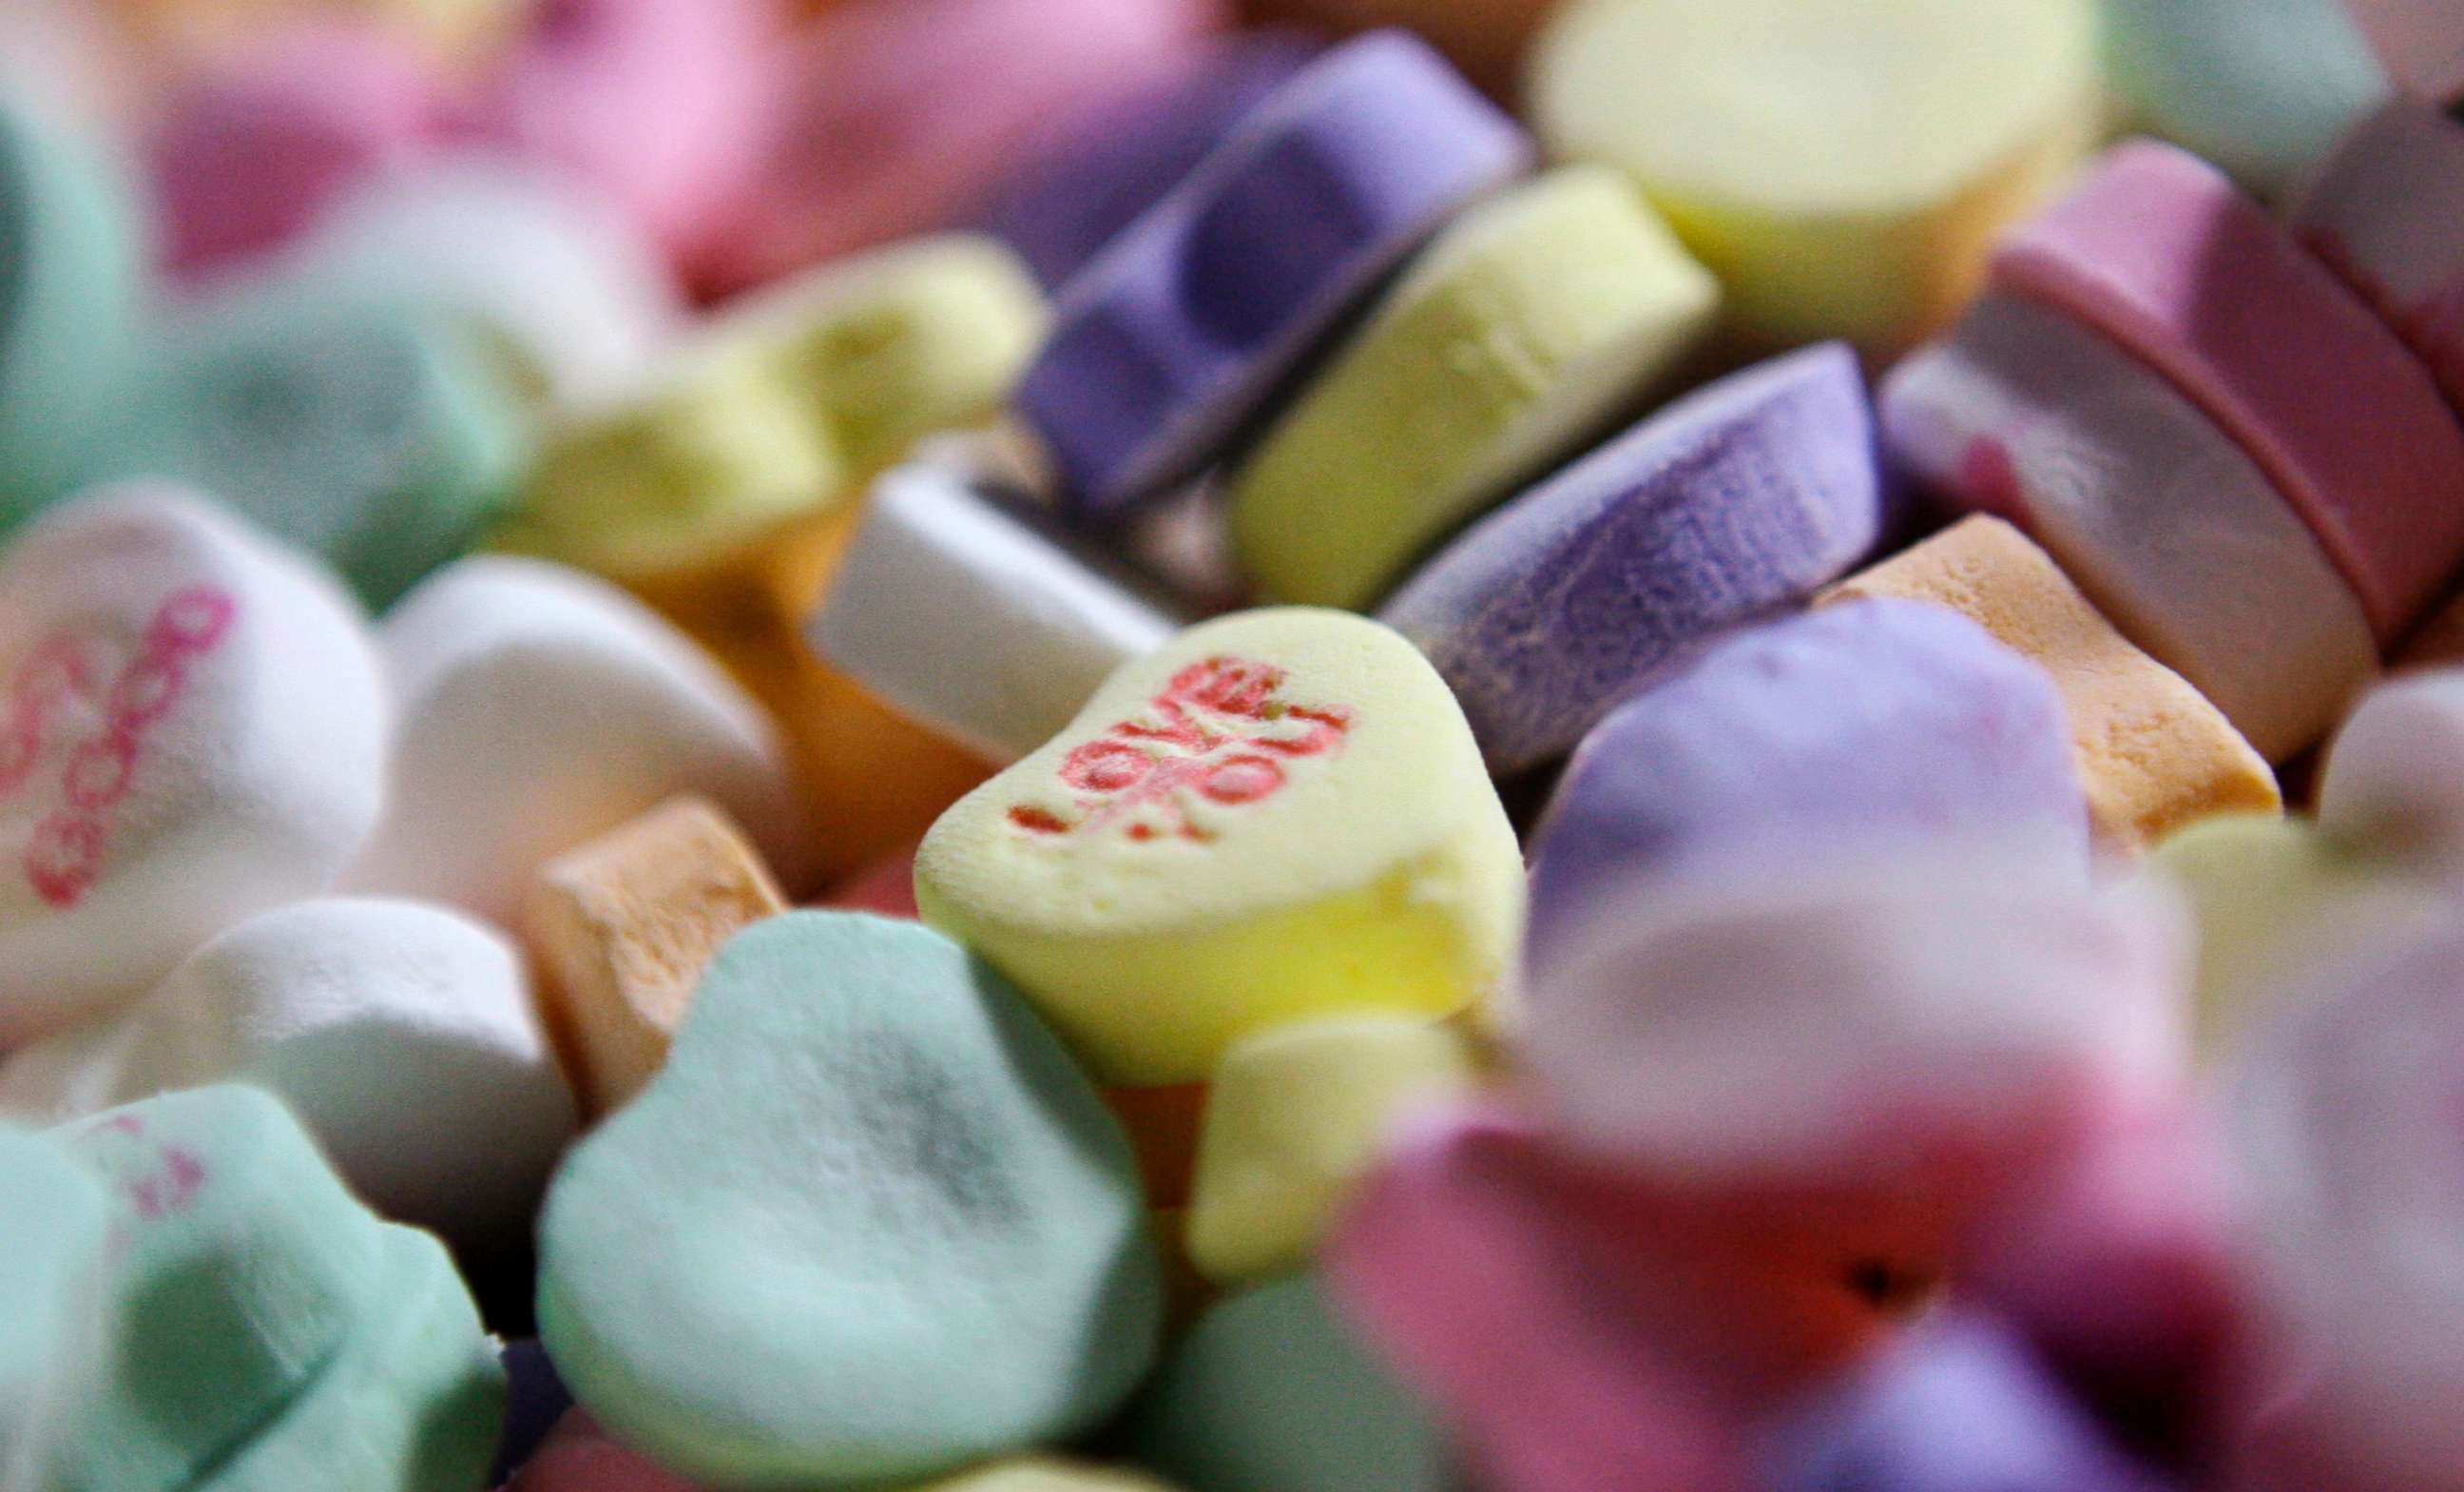 PHOTO: Colored "Sweethearts" candy is held in bulk prior to packaging at the New England Confectionery Company in Revere, Mass., Jan. 14, 2009.